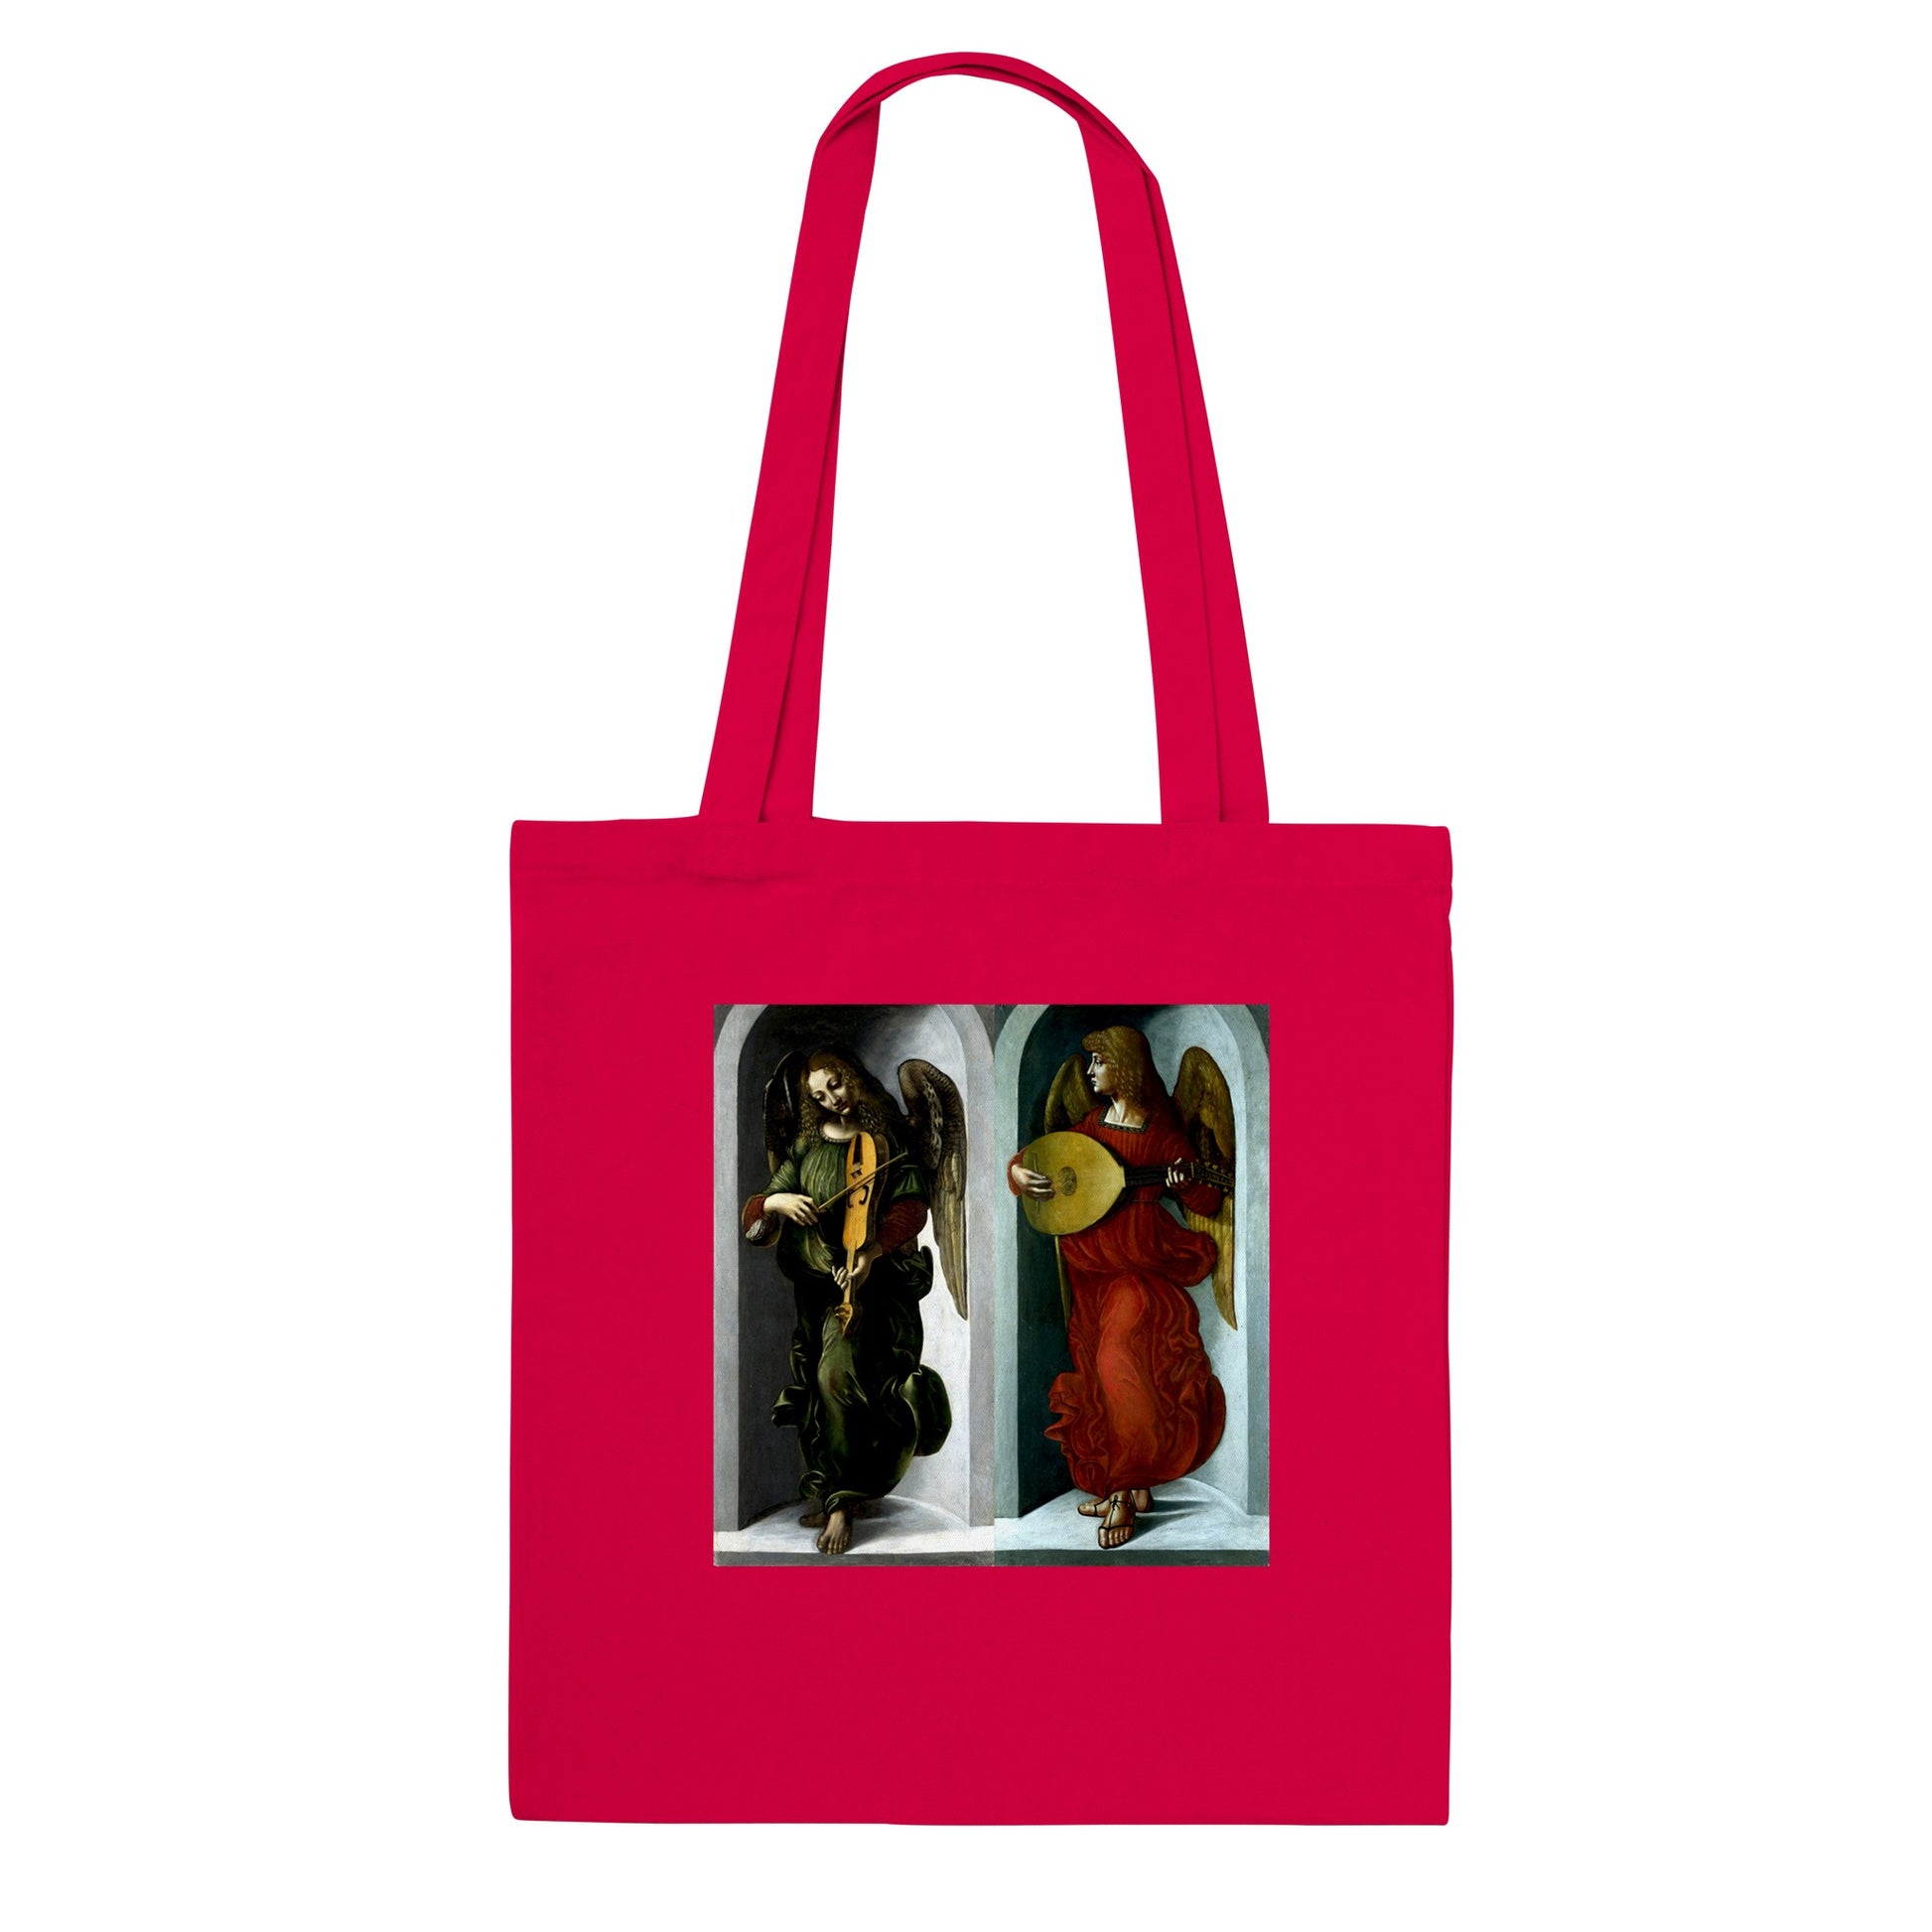 LEONARDO DA VINCI - TWO ANGELS WITH MUSICAL INSTRUMENTS, COMPILATION - CLASSIC TOTE BAG